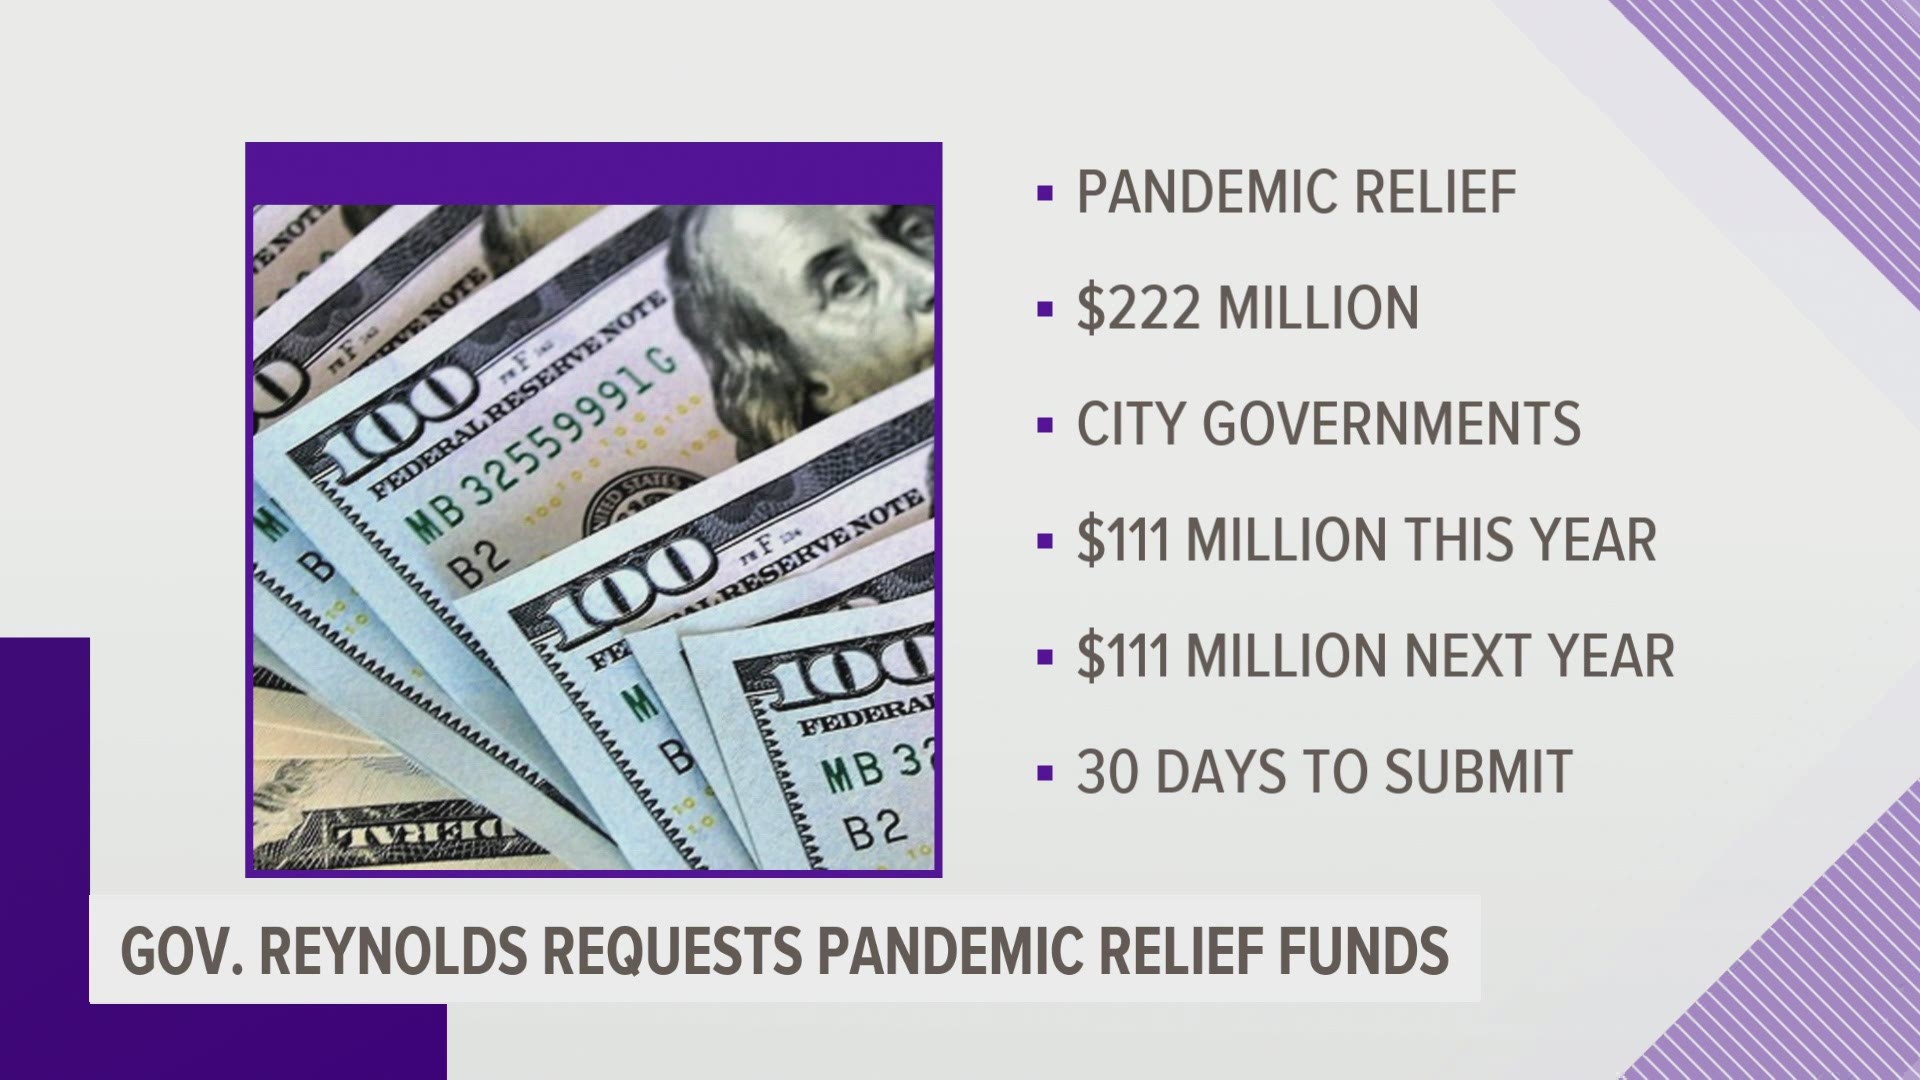 Starting Friday, Iowa city governments with less than 50,000 residents will be able to access $111 million in federal funding to assist with COVID-19 recovery.